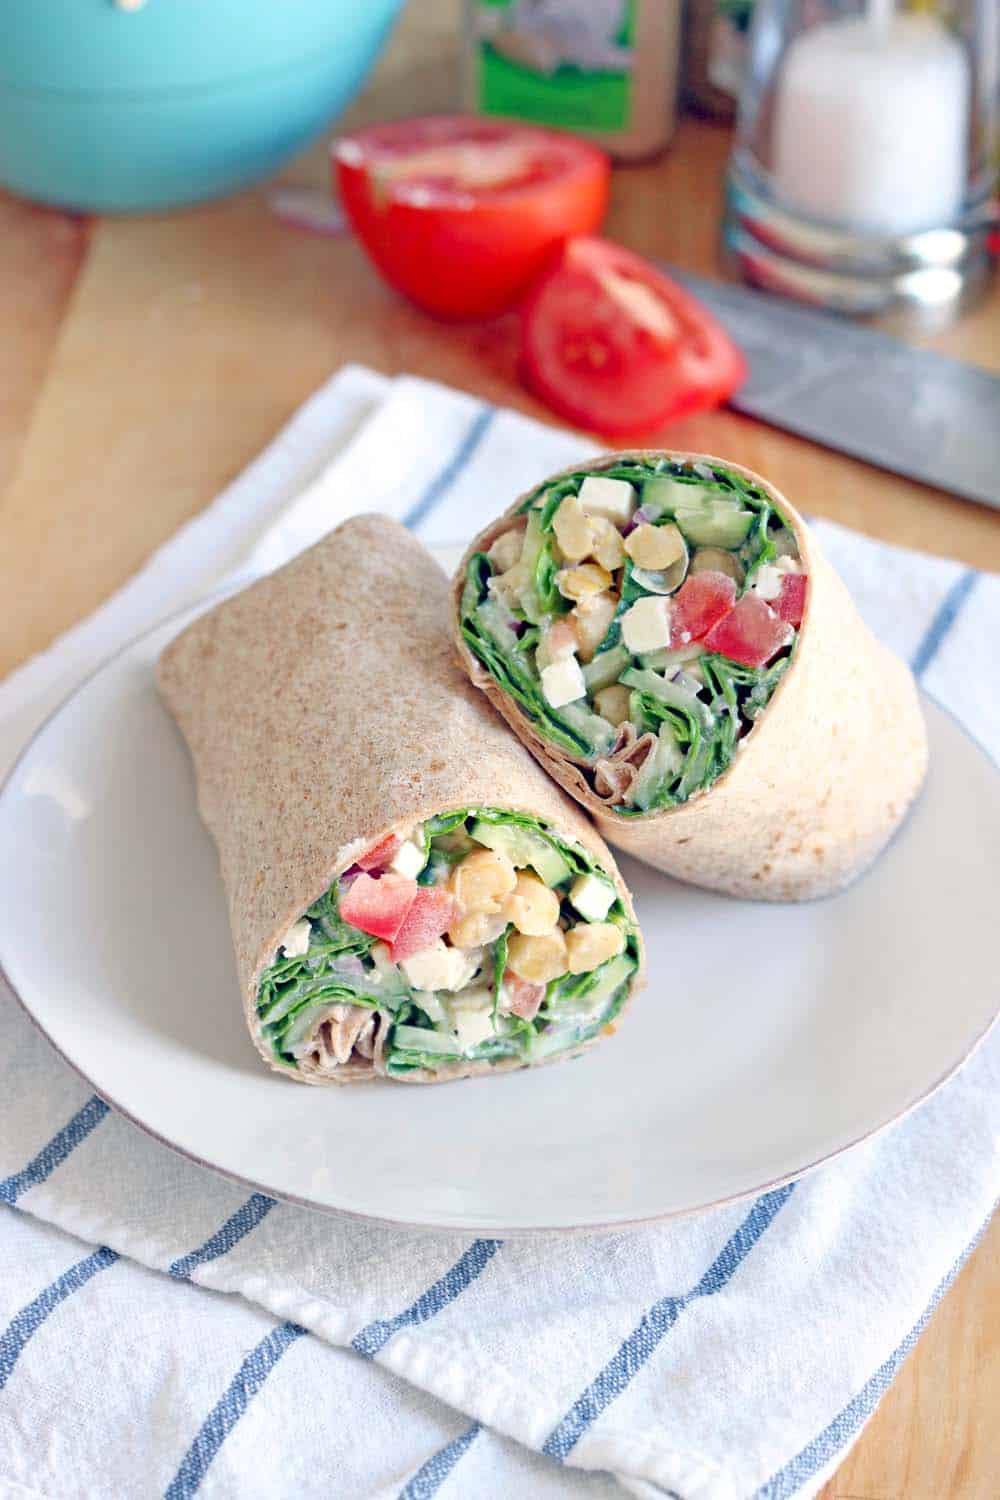 Two halves of a wrap filled with greens, chickpeas, tomatoes, feta, and other fillings, displayed on a white plate, on a blue and white striped cloth. Ingredients are in the background.